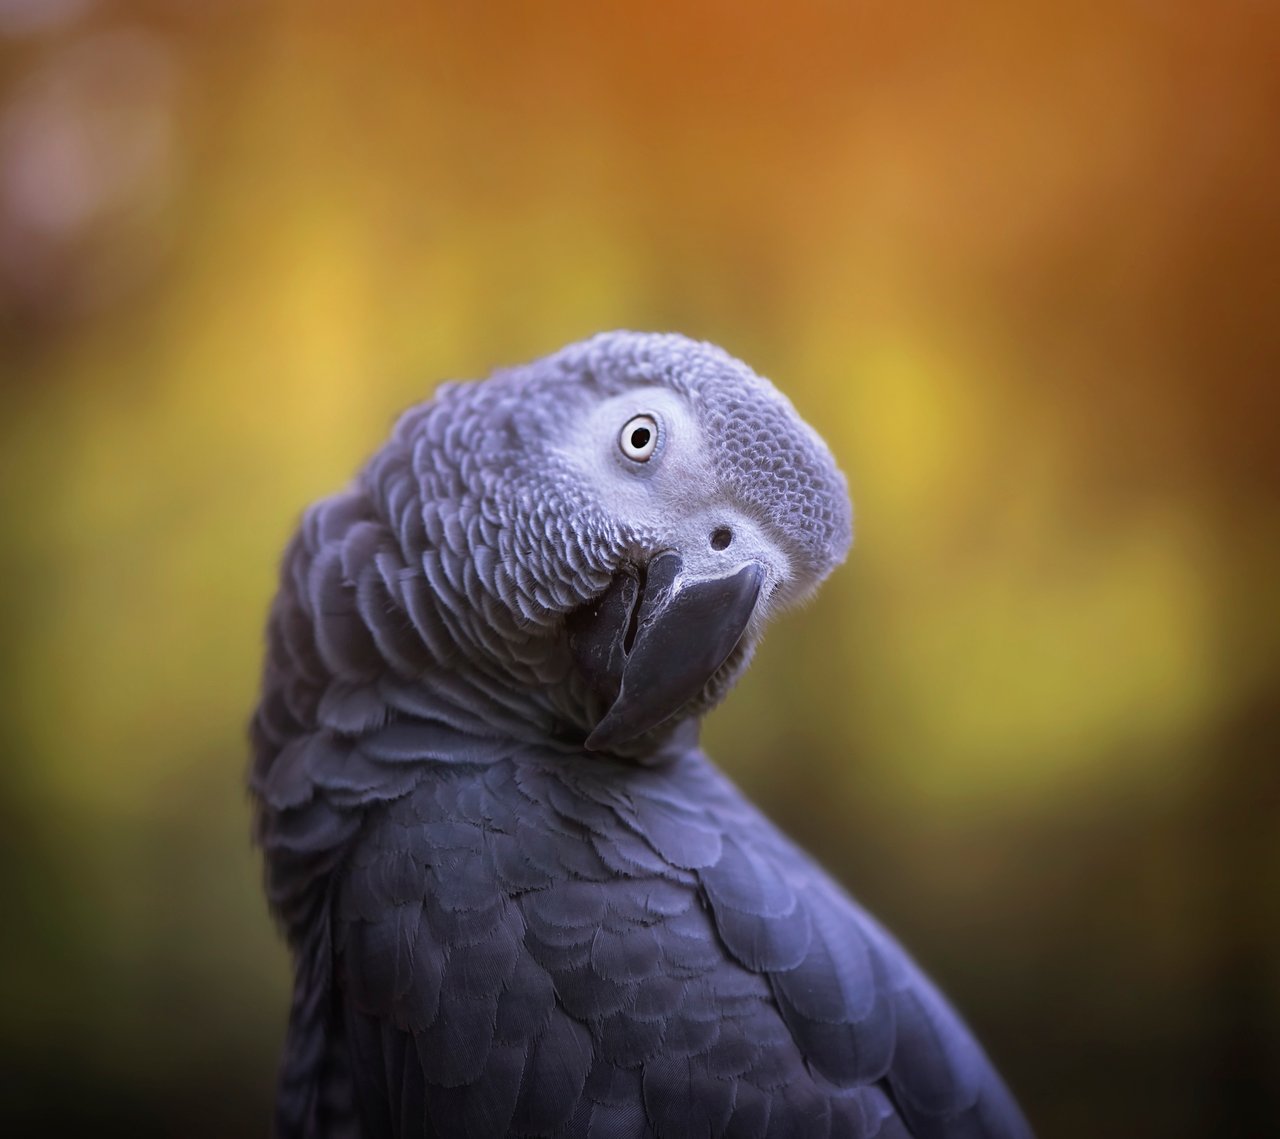 African grey parrot in the wild - World Animal Protection - Wildlife. Not pets